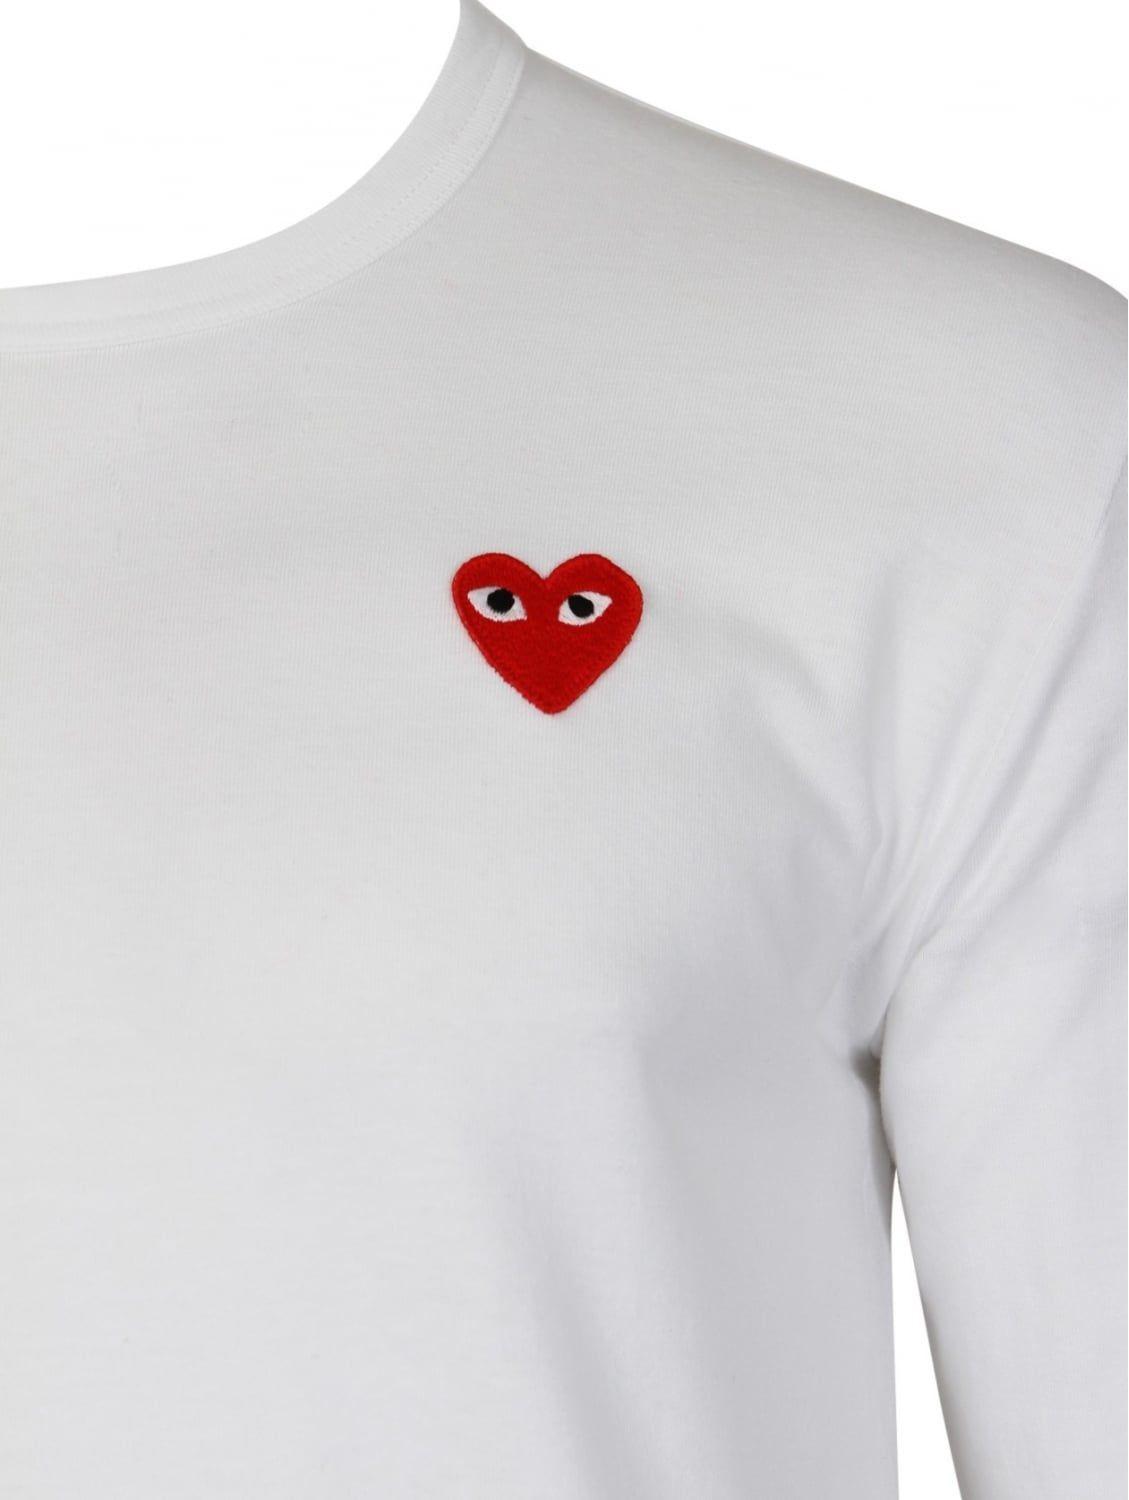 Gray and Red Heart Logo - Comme Des Garcons PLAY Red Heart Long Sleeve T Shirt White. HERVIA